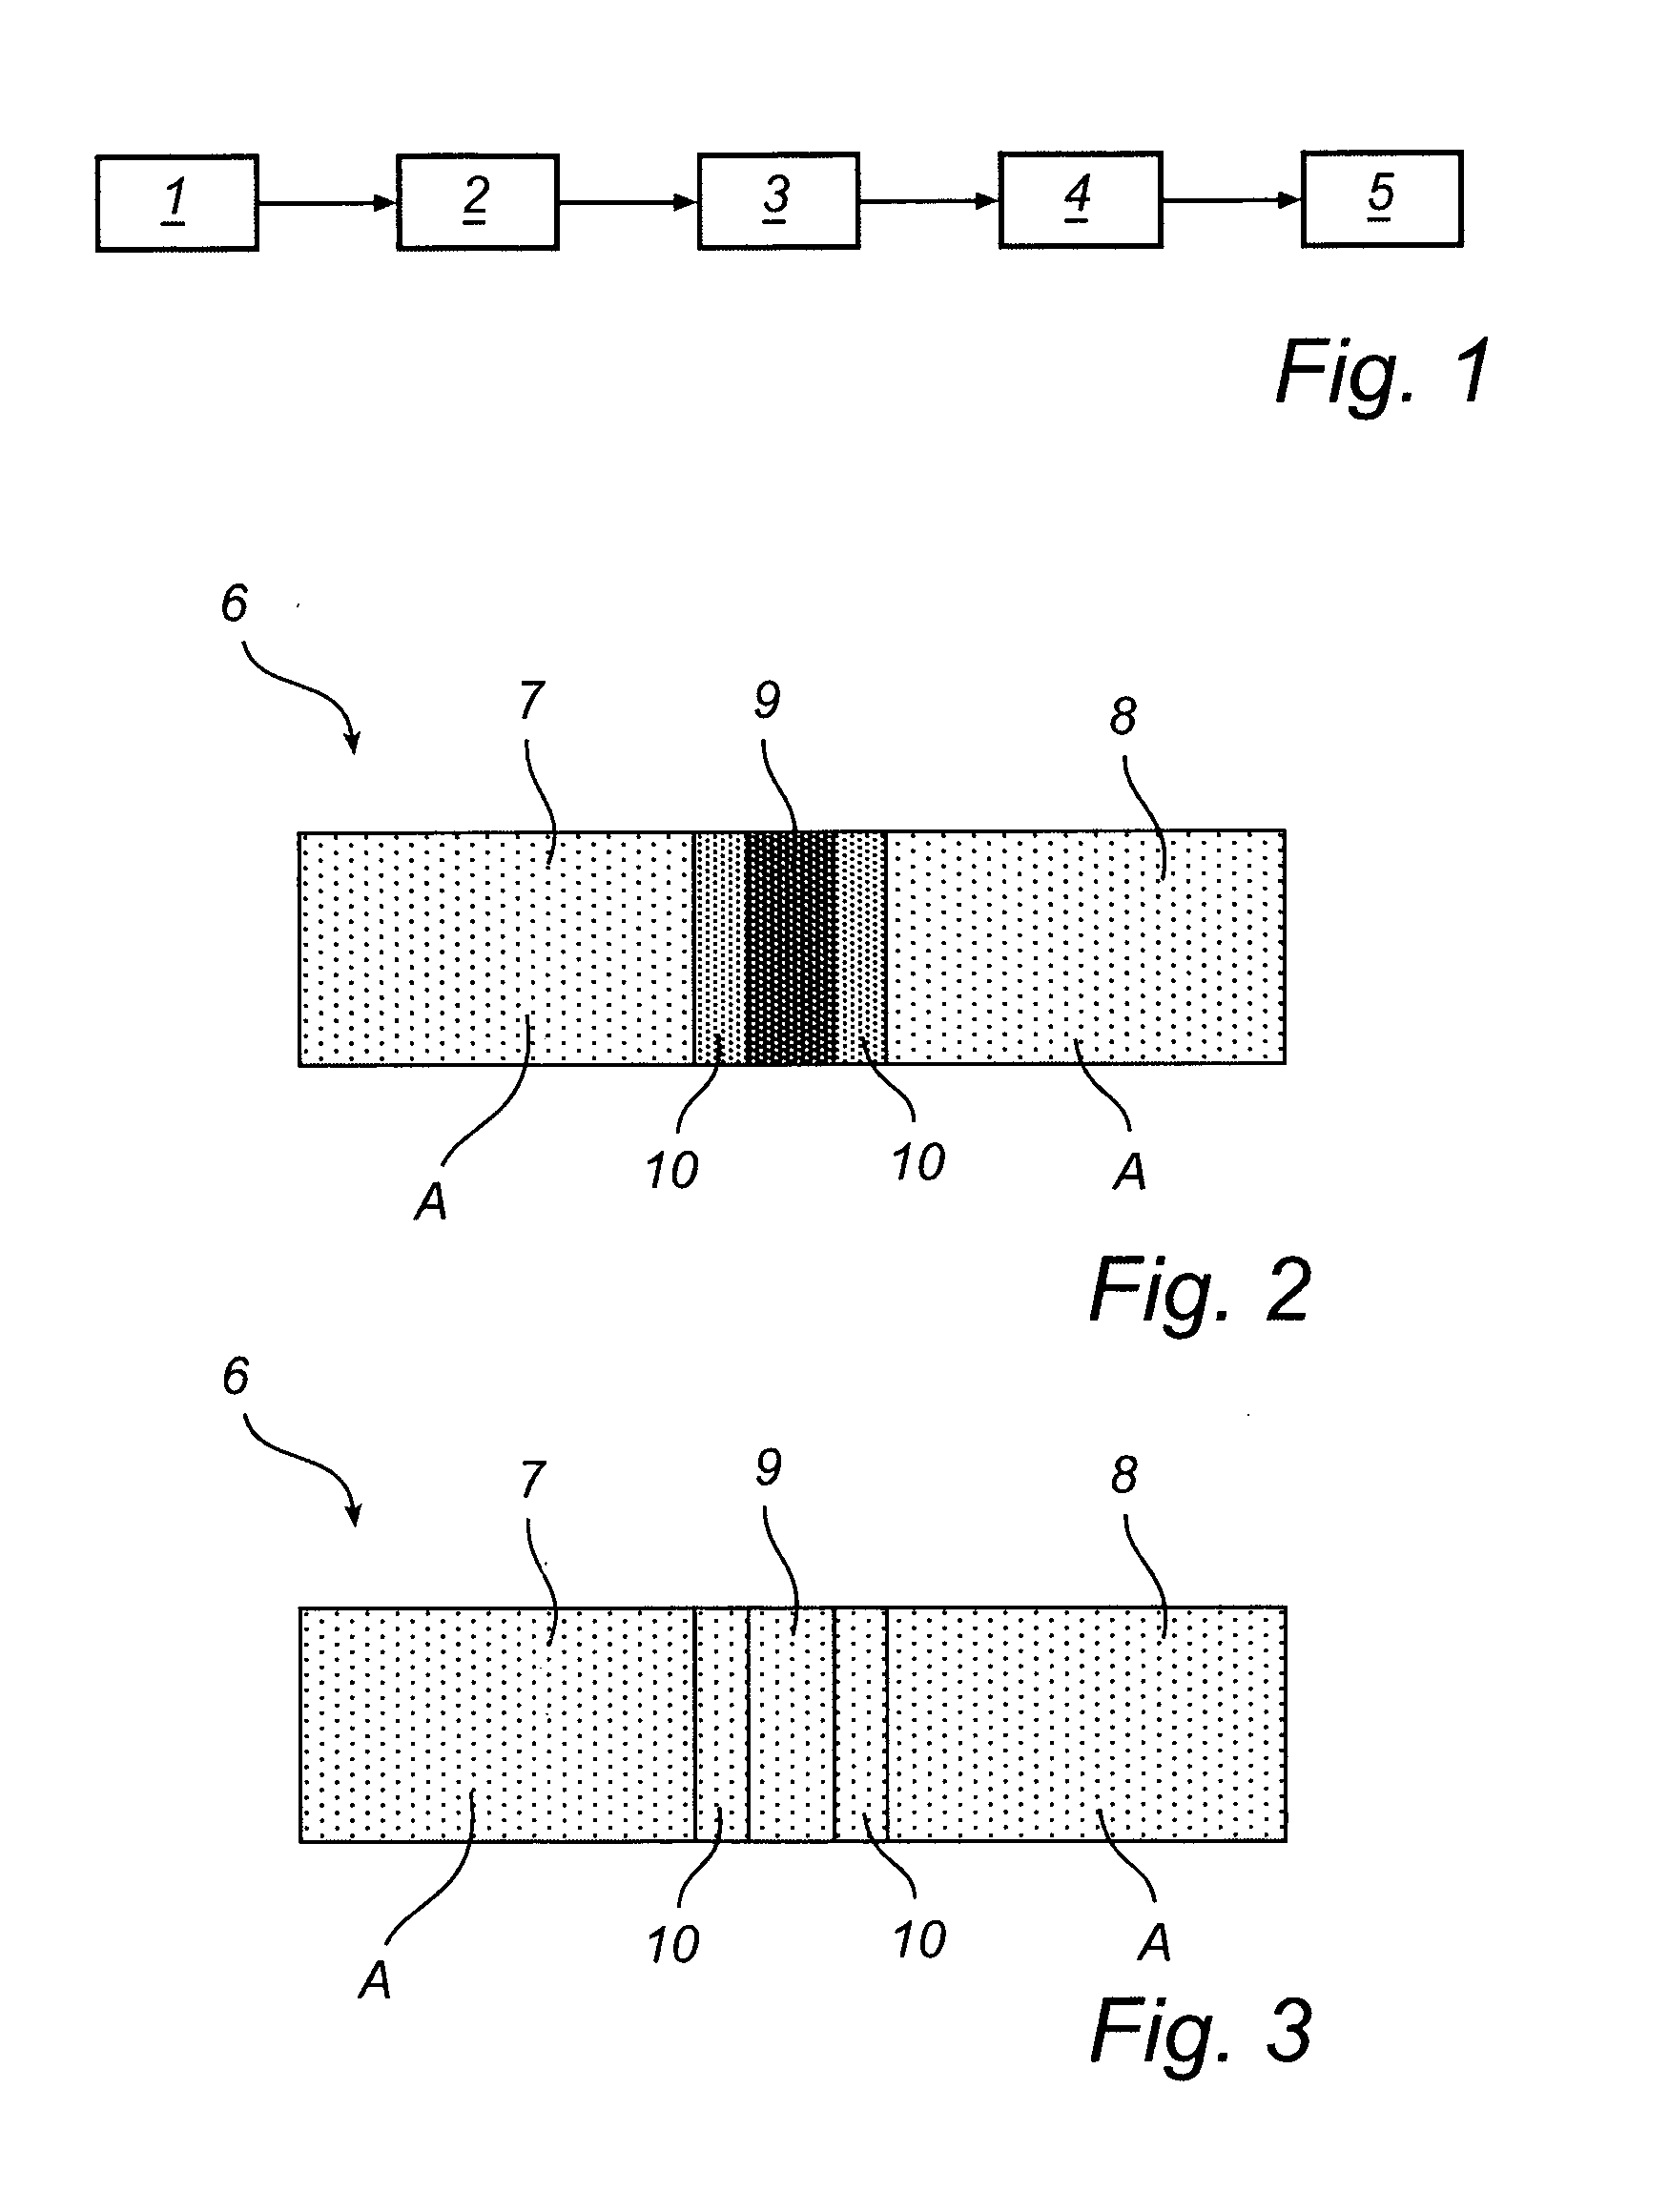 Method for Manufacturing a Steel Component, A Weld Seam, A Welded Steel Component, and a Bearing Component